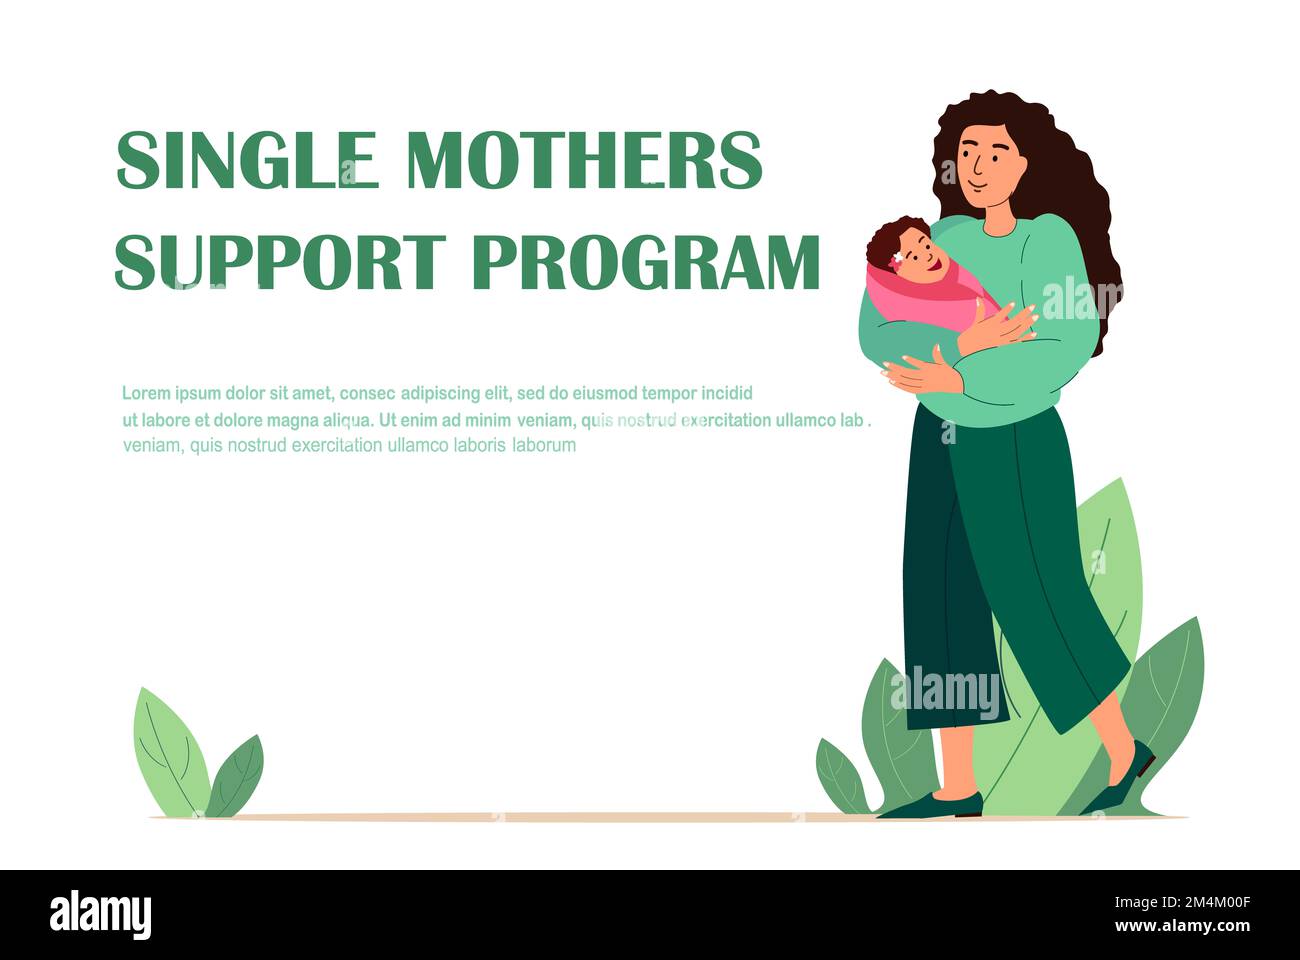 Programs for Single Mothers Landing Page Template. Young Female Character Holding Baby on Hands Adorable Woman and Child Communicate, Maternity, Mothe Stock Photo